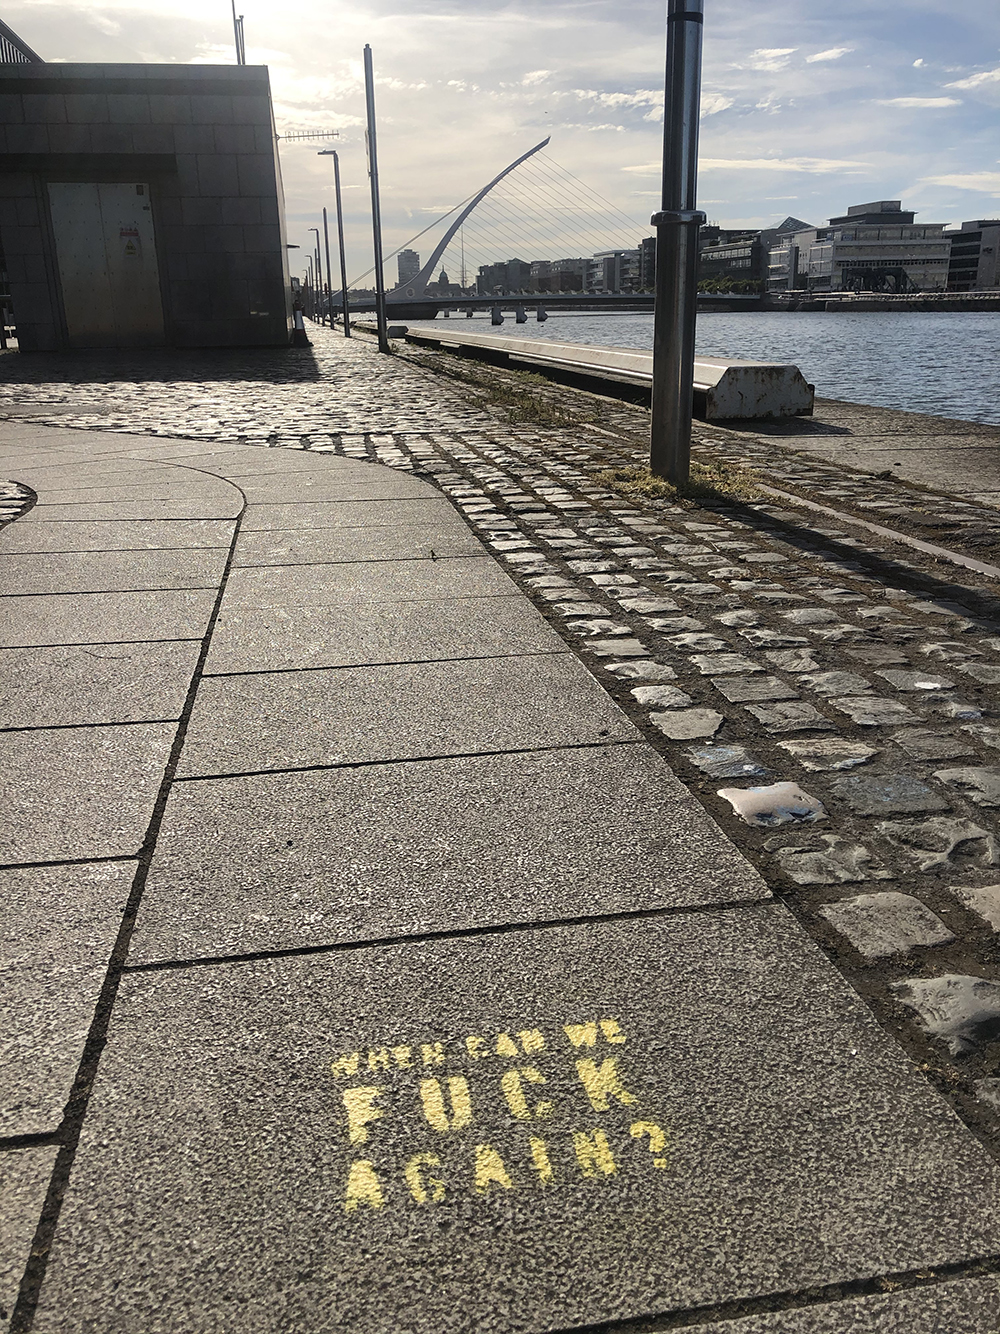 Stencil in Dublin, 2020. Photo by Thomas Strong.